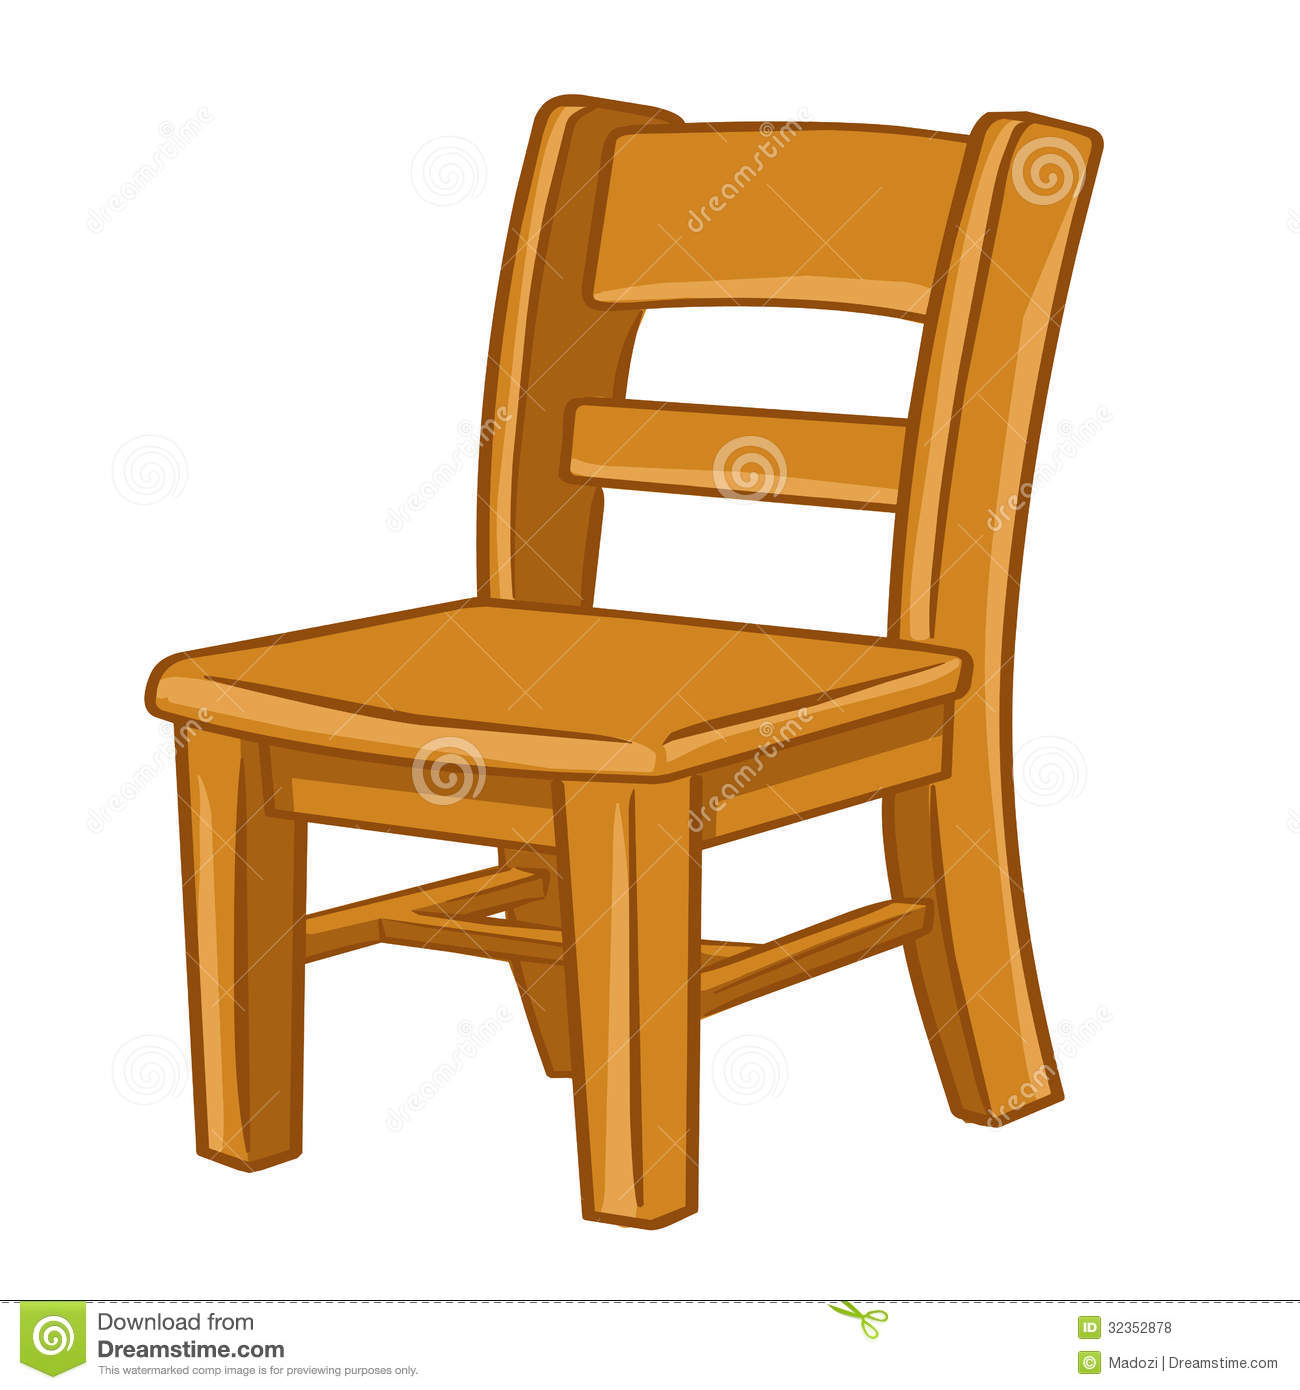 Wood Chair Isolated Illustration Royalty Free Stock Photos   Image